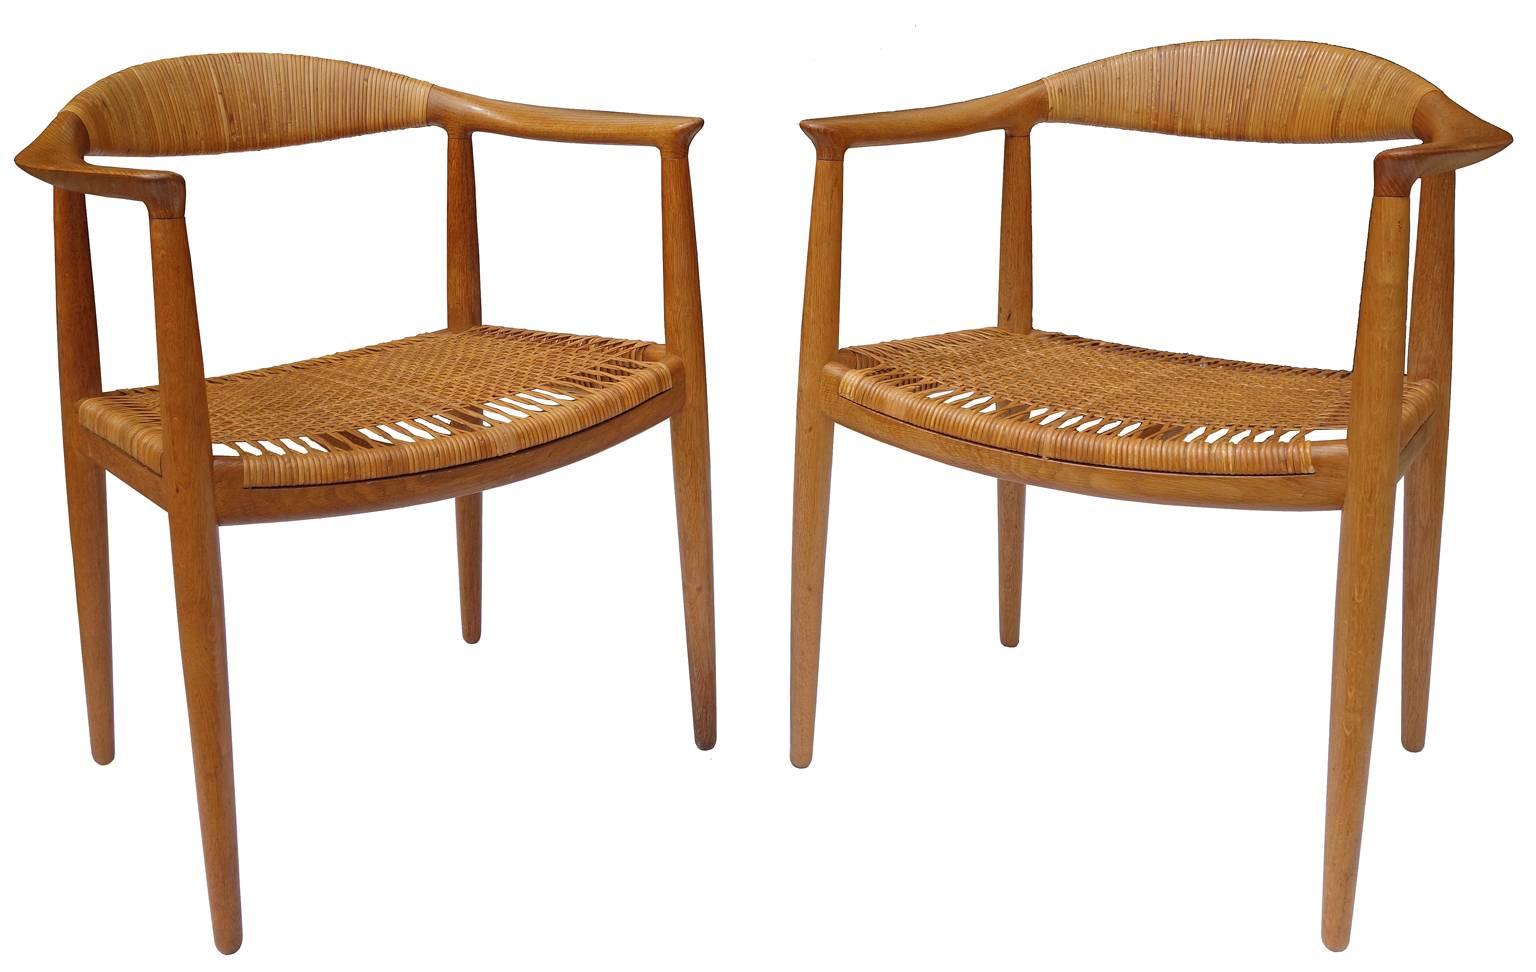 Model JH501, Denmark, 1960s; teak, woven reed; branded with designer and manufacturer name (Johannes Hansen). All cane is in excellent condition. Also known as "The Chair"

Price is per chair